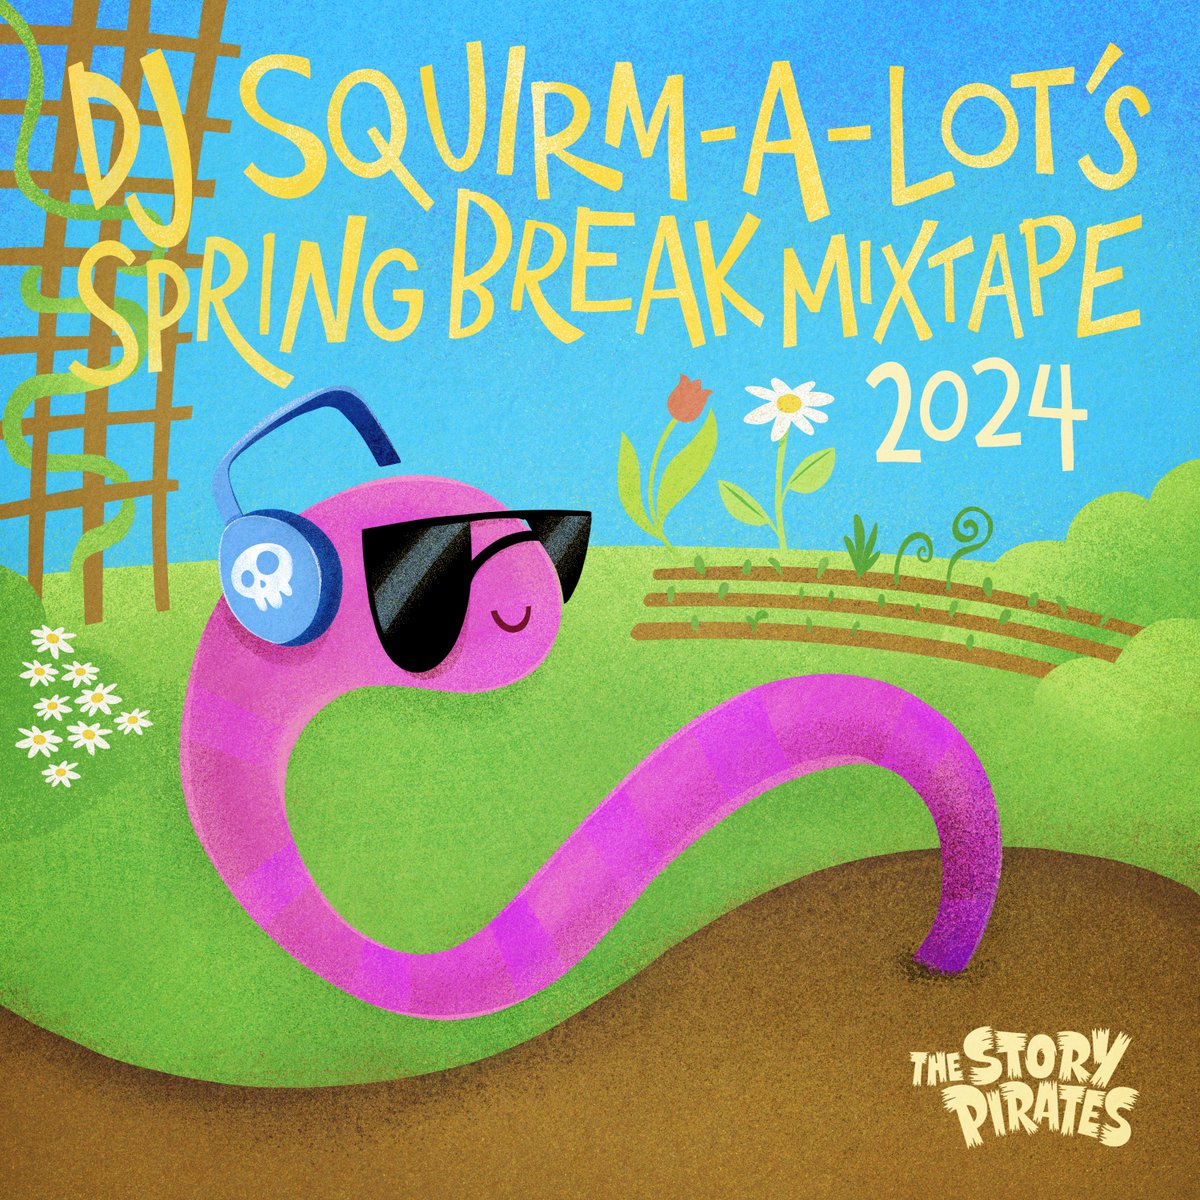 What Story Pirates song are you singing along to with the kids this spring break?! DJ Squirm-a-Lot is taking a break from modeling tubes to smash the spacebar and bring us some of our favorites! Listen now on our new Spring Break Mixtape bonus episode! megaphone.link/GLT2527227675